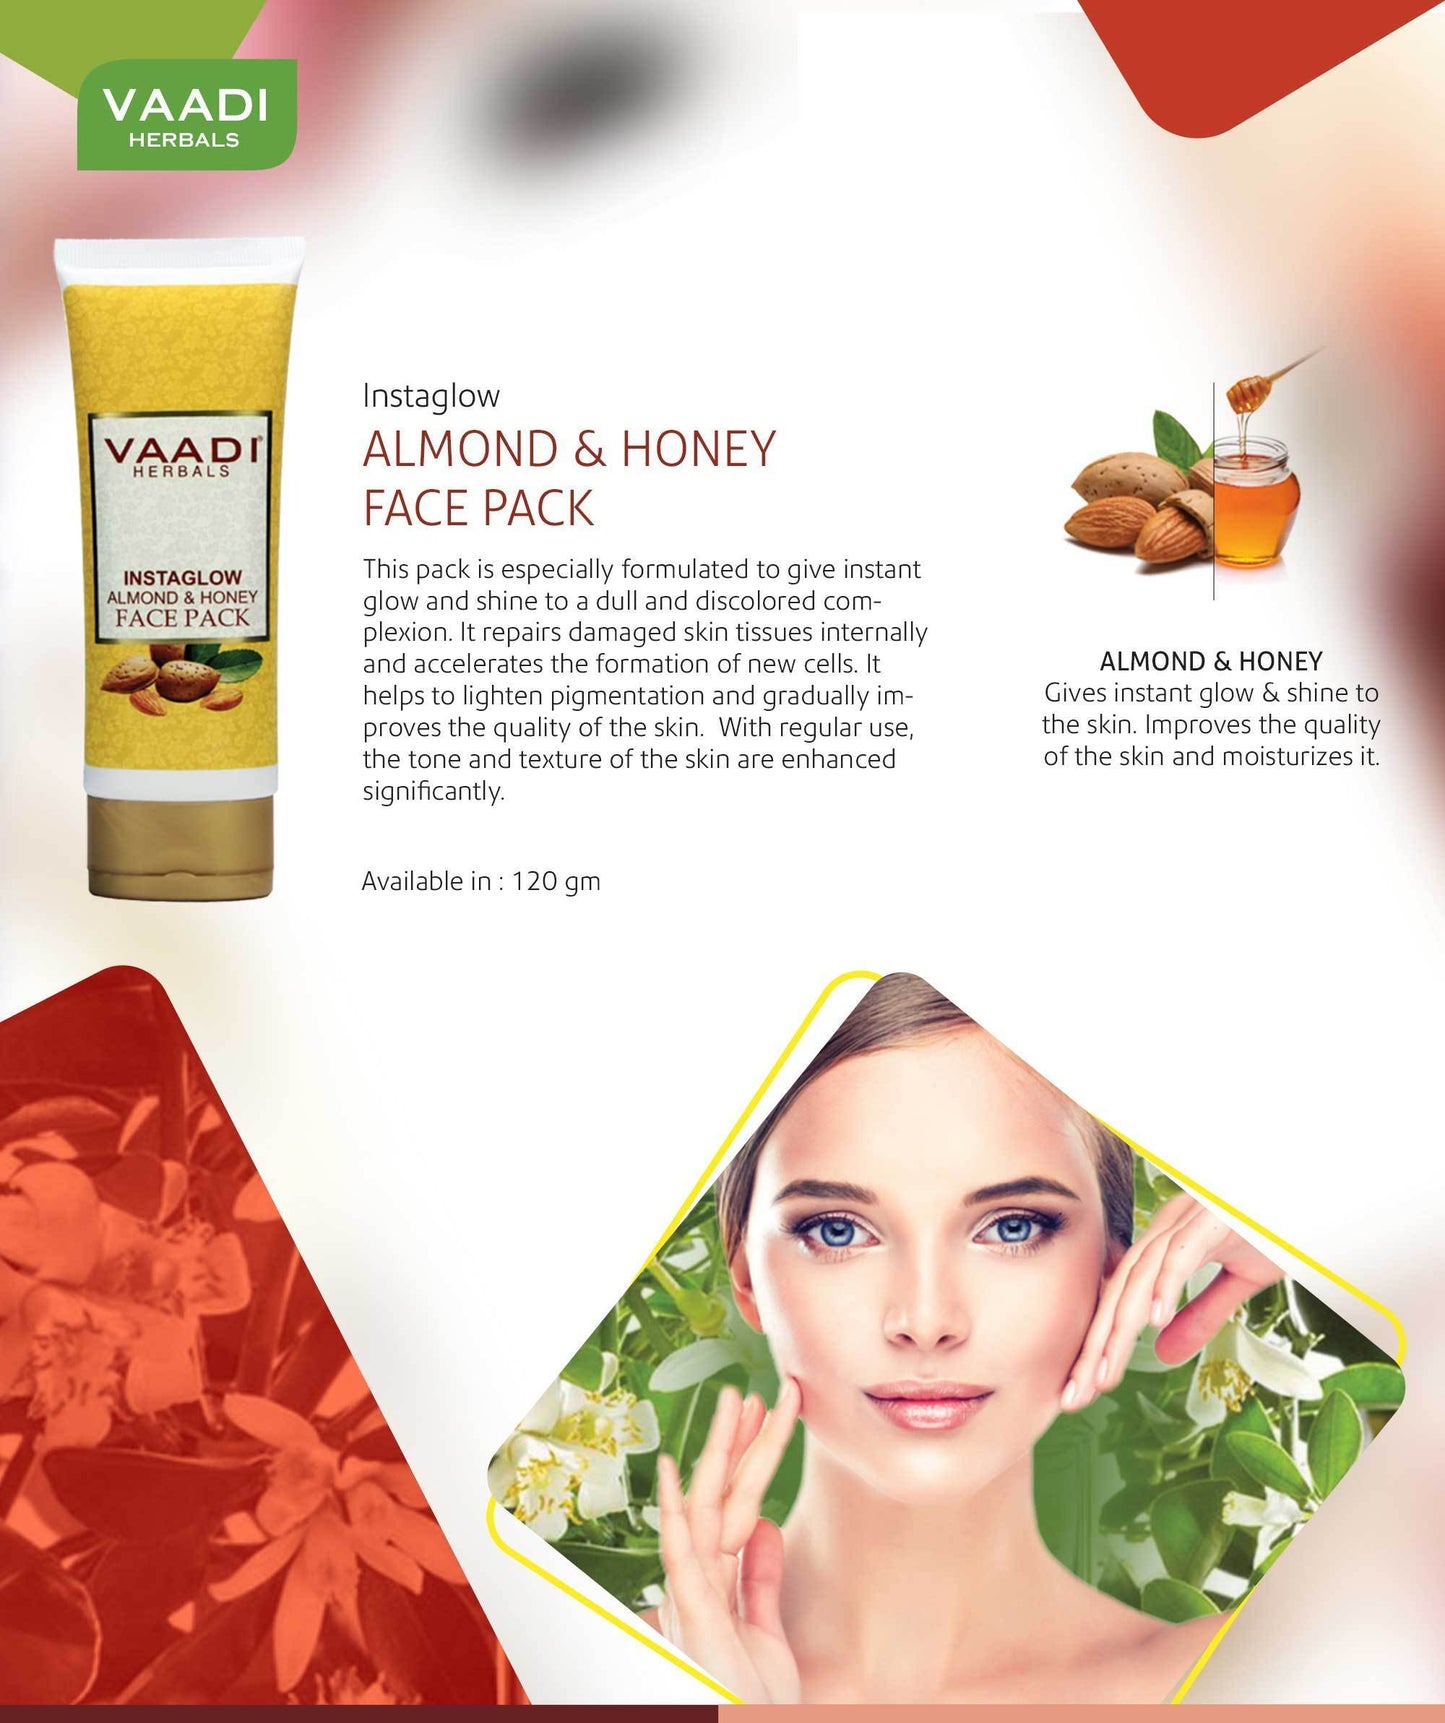 Organic InstaGlow Face Pack with Almond & Honey - Lightens Pigmentation - Gives Instant Glow (2 x 120 gms /4.3 oz)